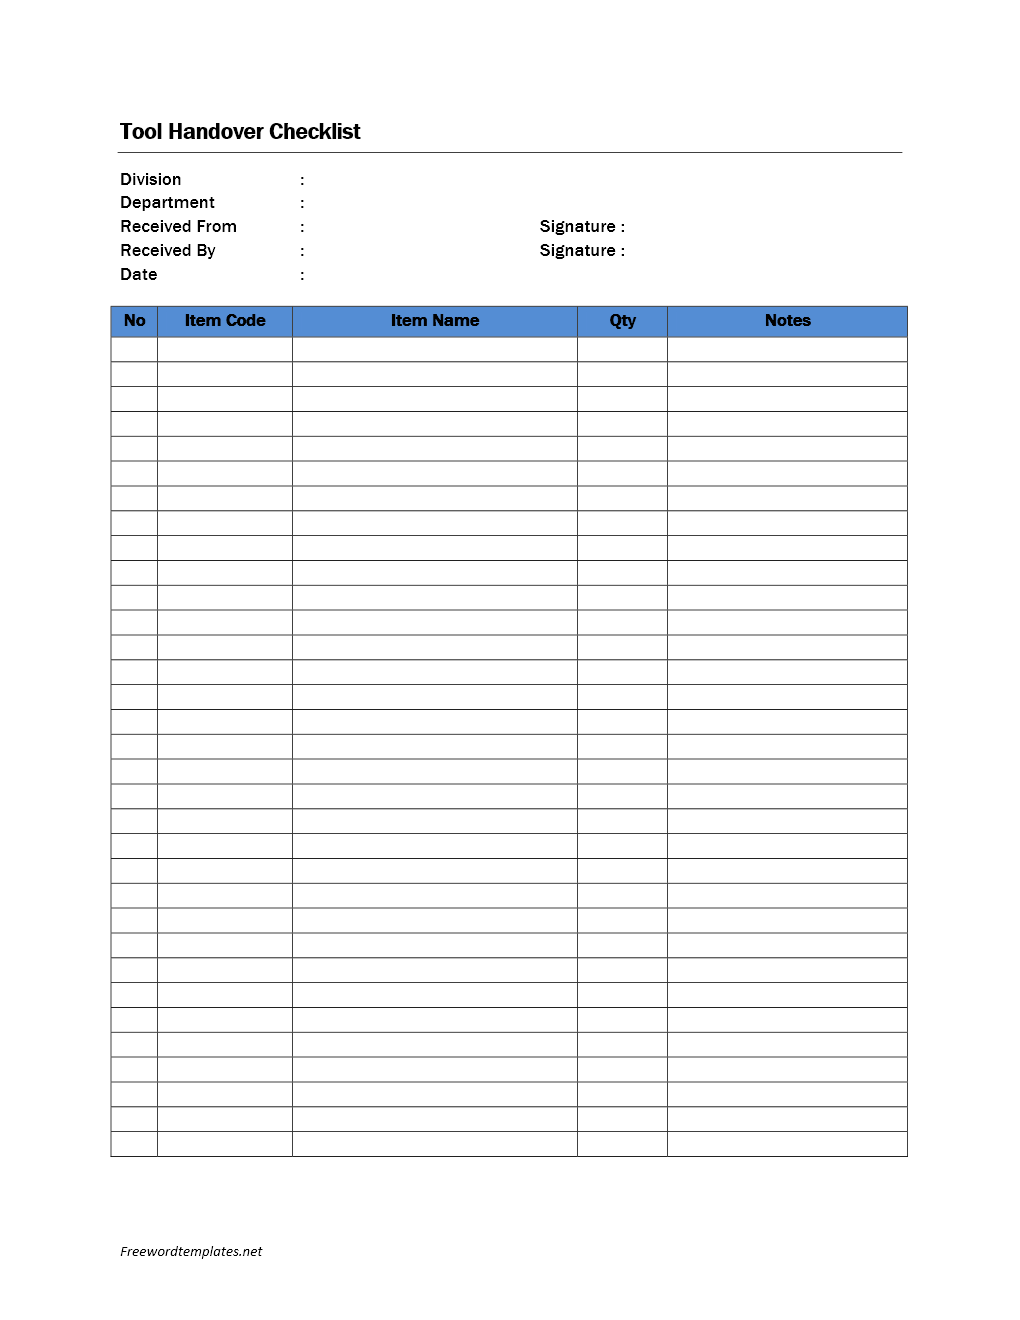 Wood Shed Design Warehouse Cleaning Checklist Template Excel Free